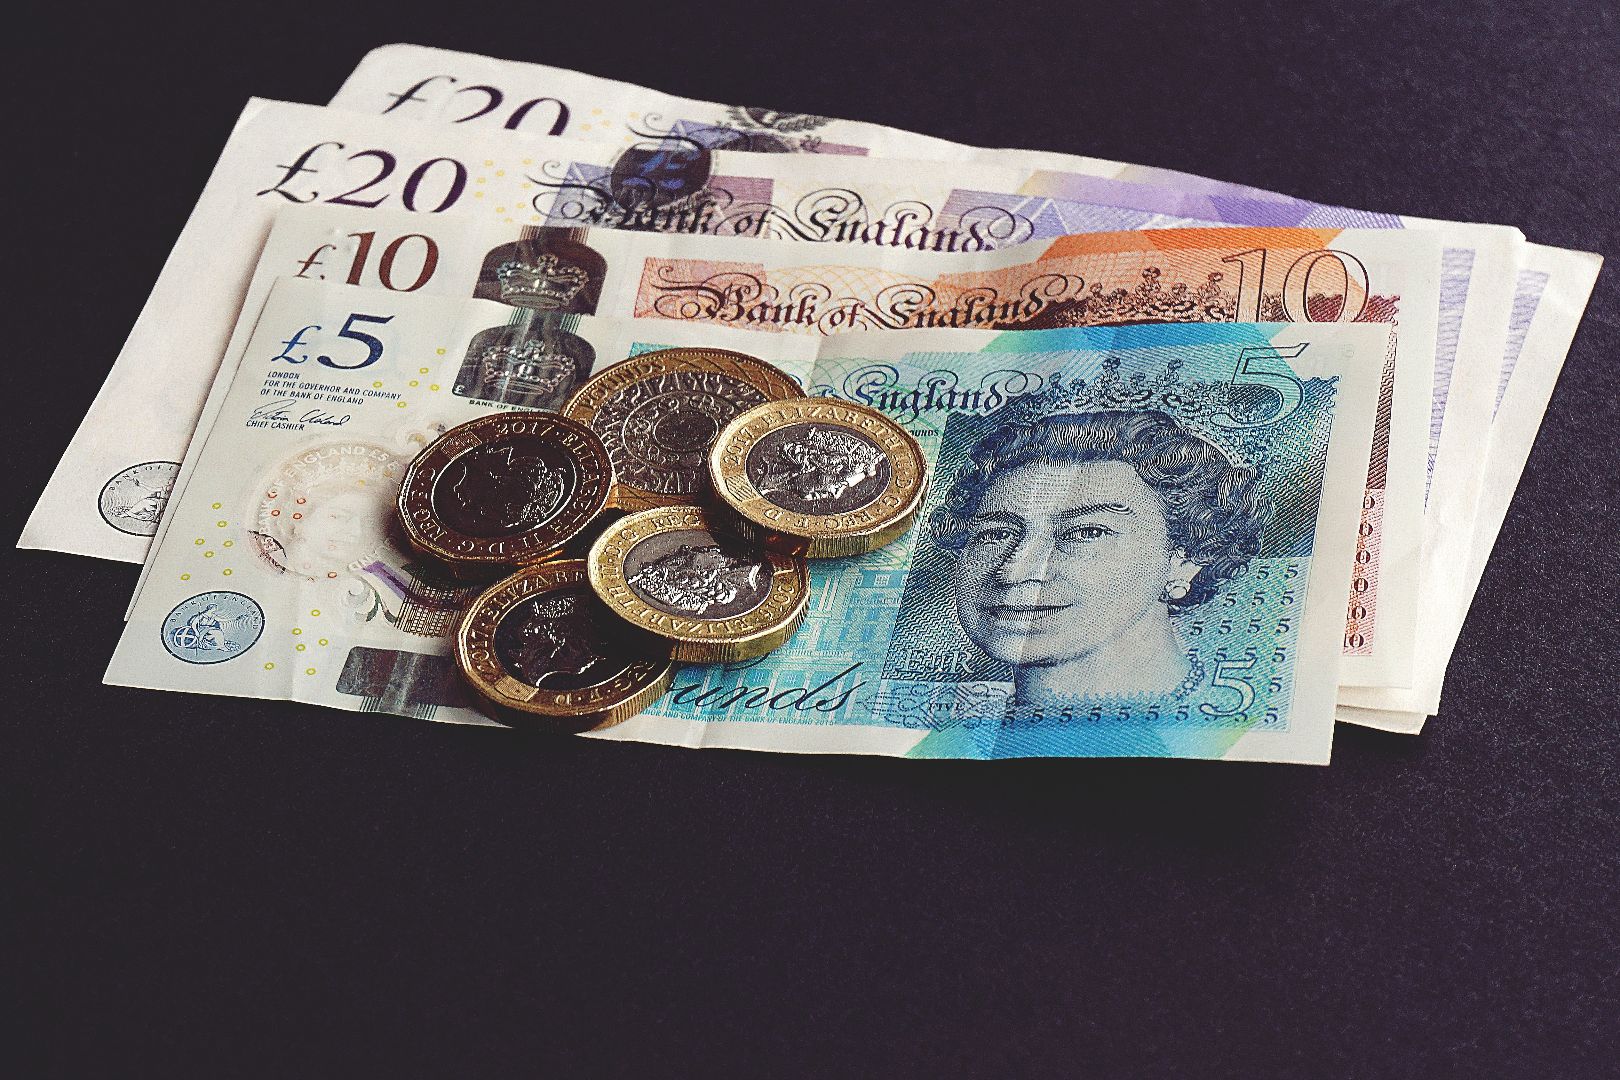 Photograph of UK bank notes and pound coins